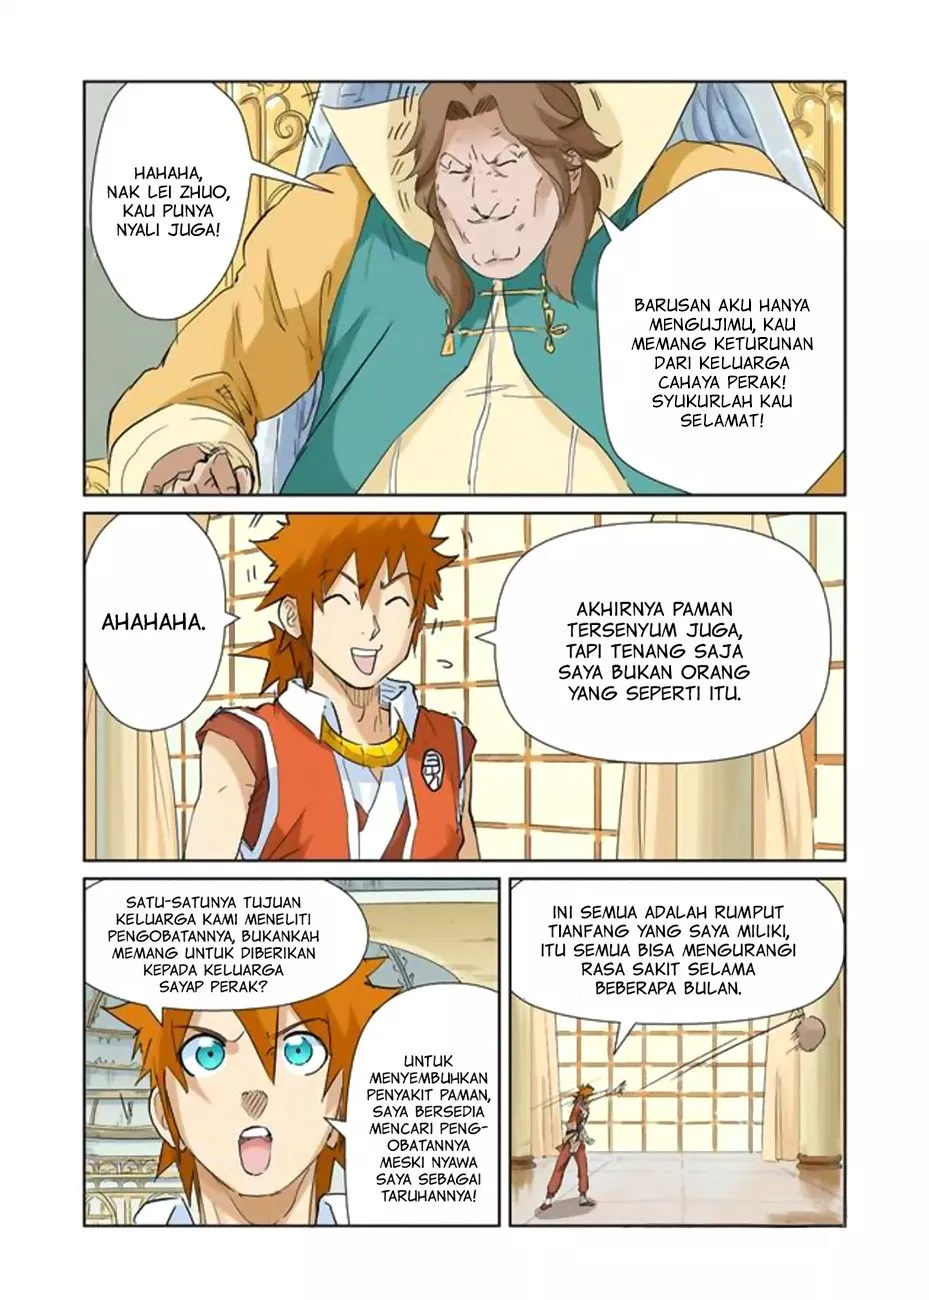 Tales of Demons and Gods Chapter 154